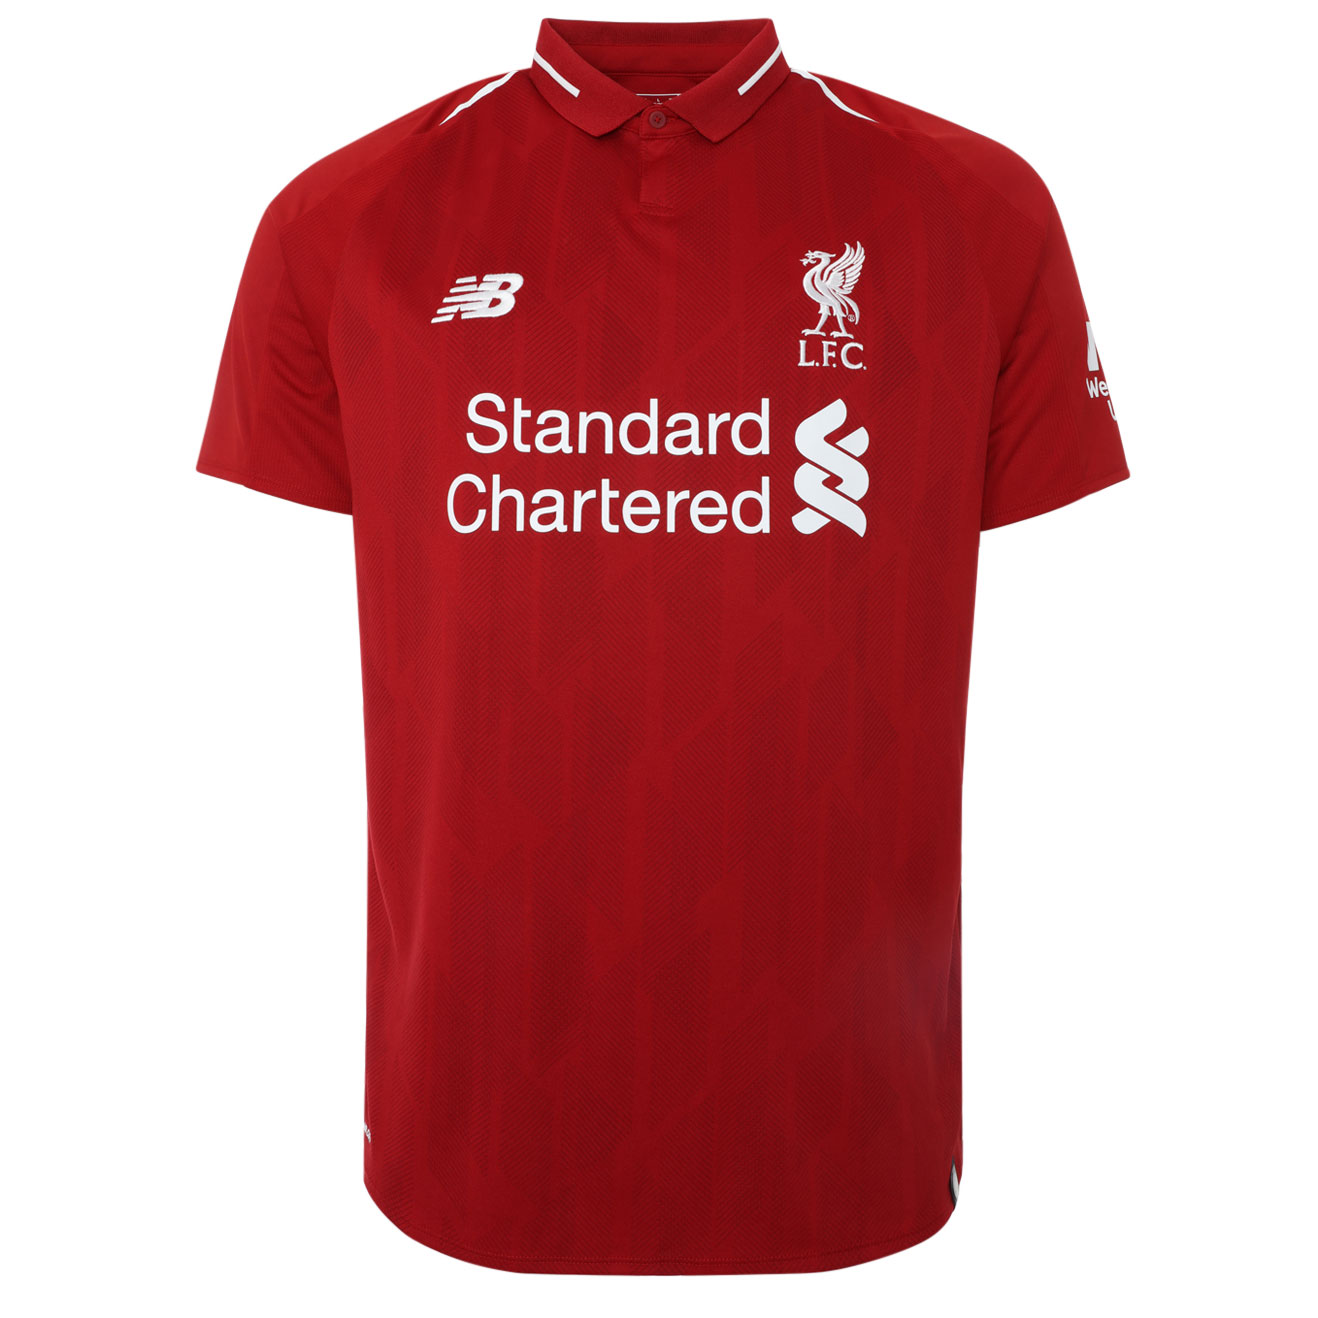 New LFC Home Shirt Front 2018-19